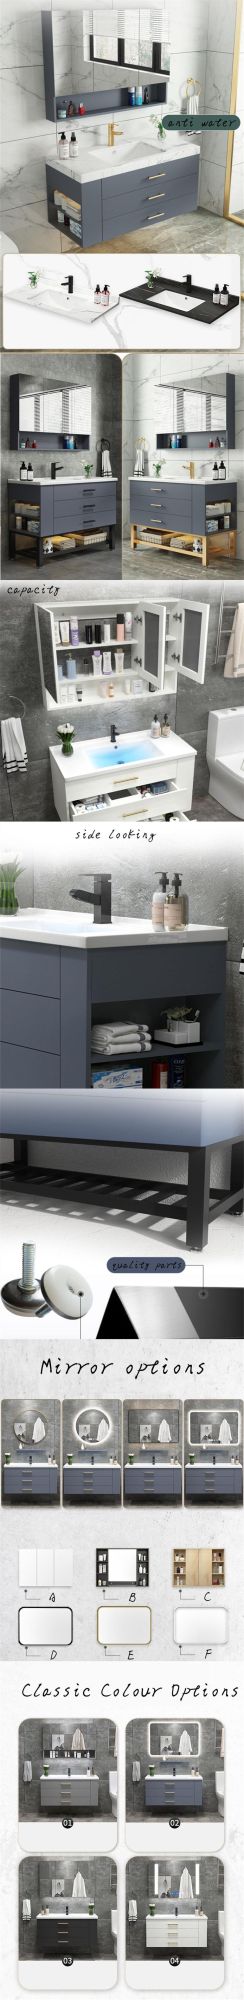 Wall Mounted Bathroom Vanity Cabinet with Modern Simple Metal Leg and Glass Mirror